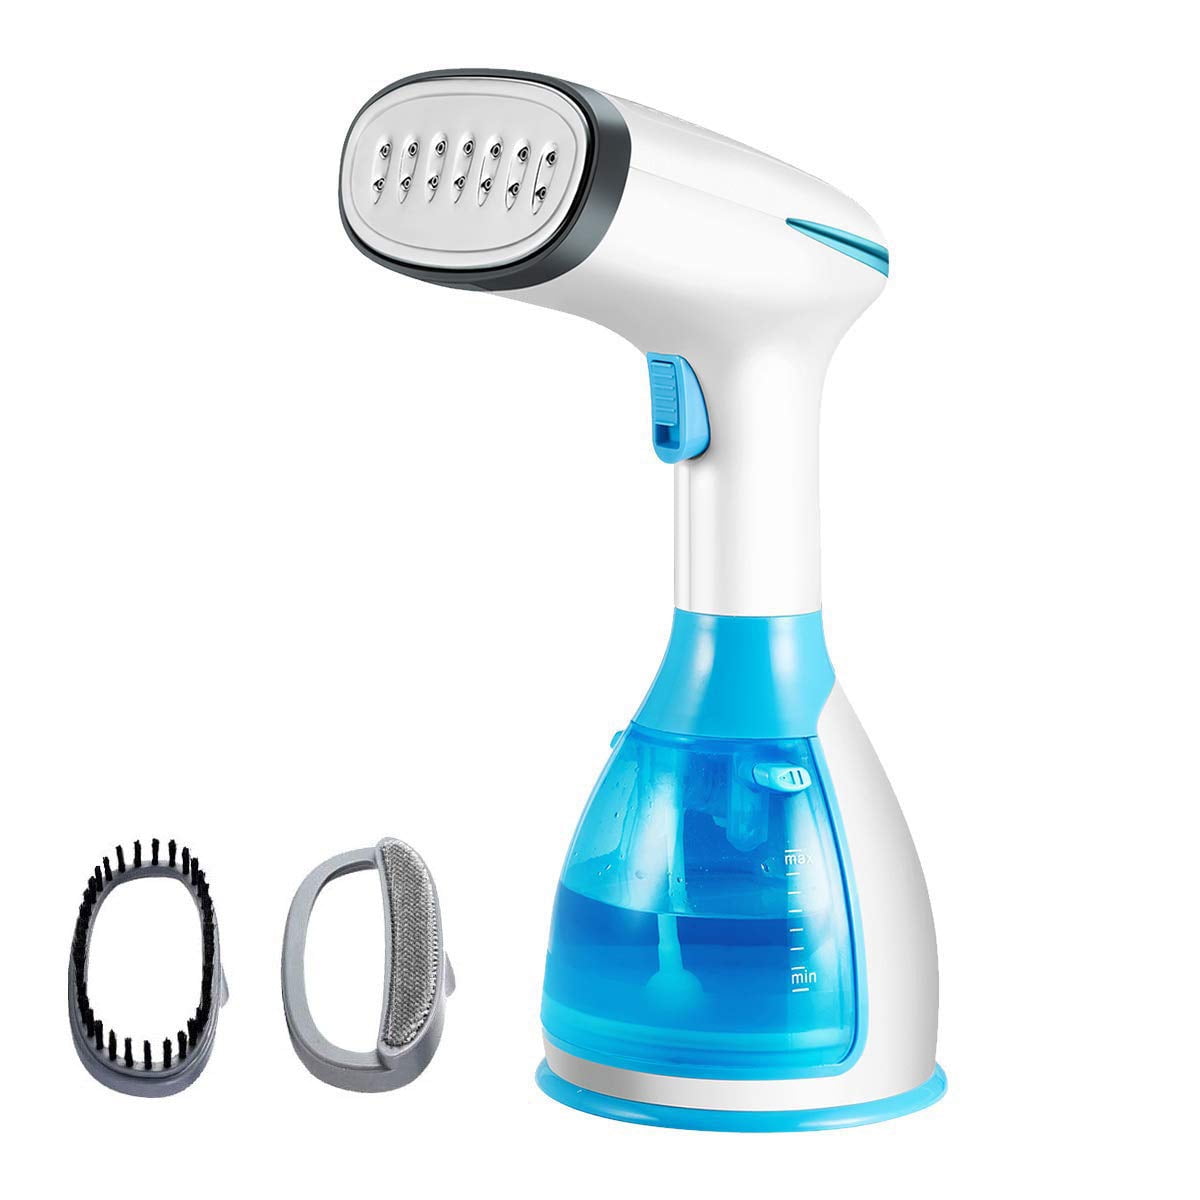 Portable Handheld Garment Steamer For Clothes Fabric Steam Iron Travel Fast Heat 